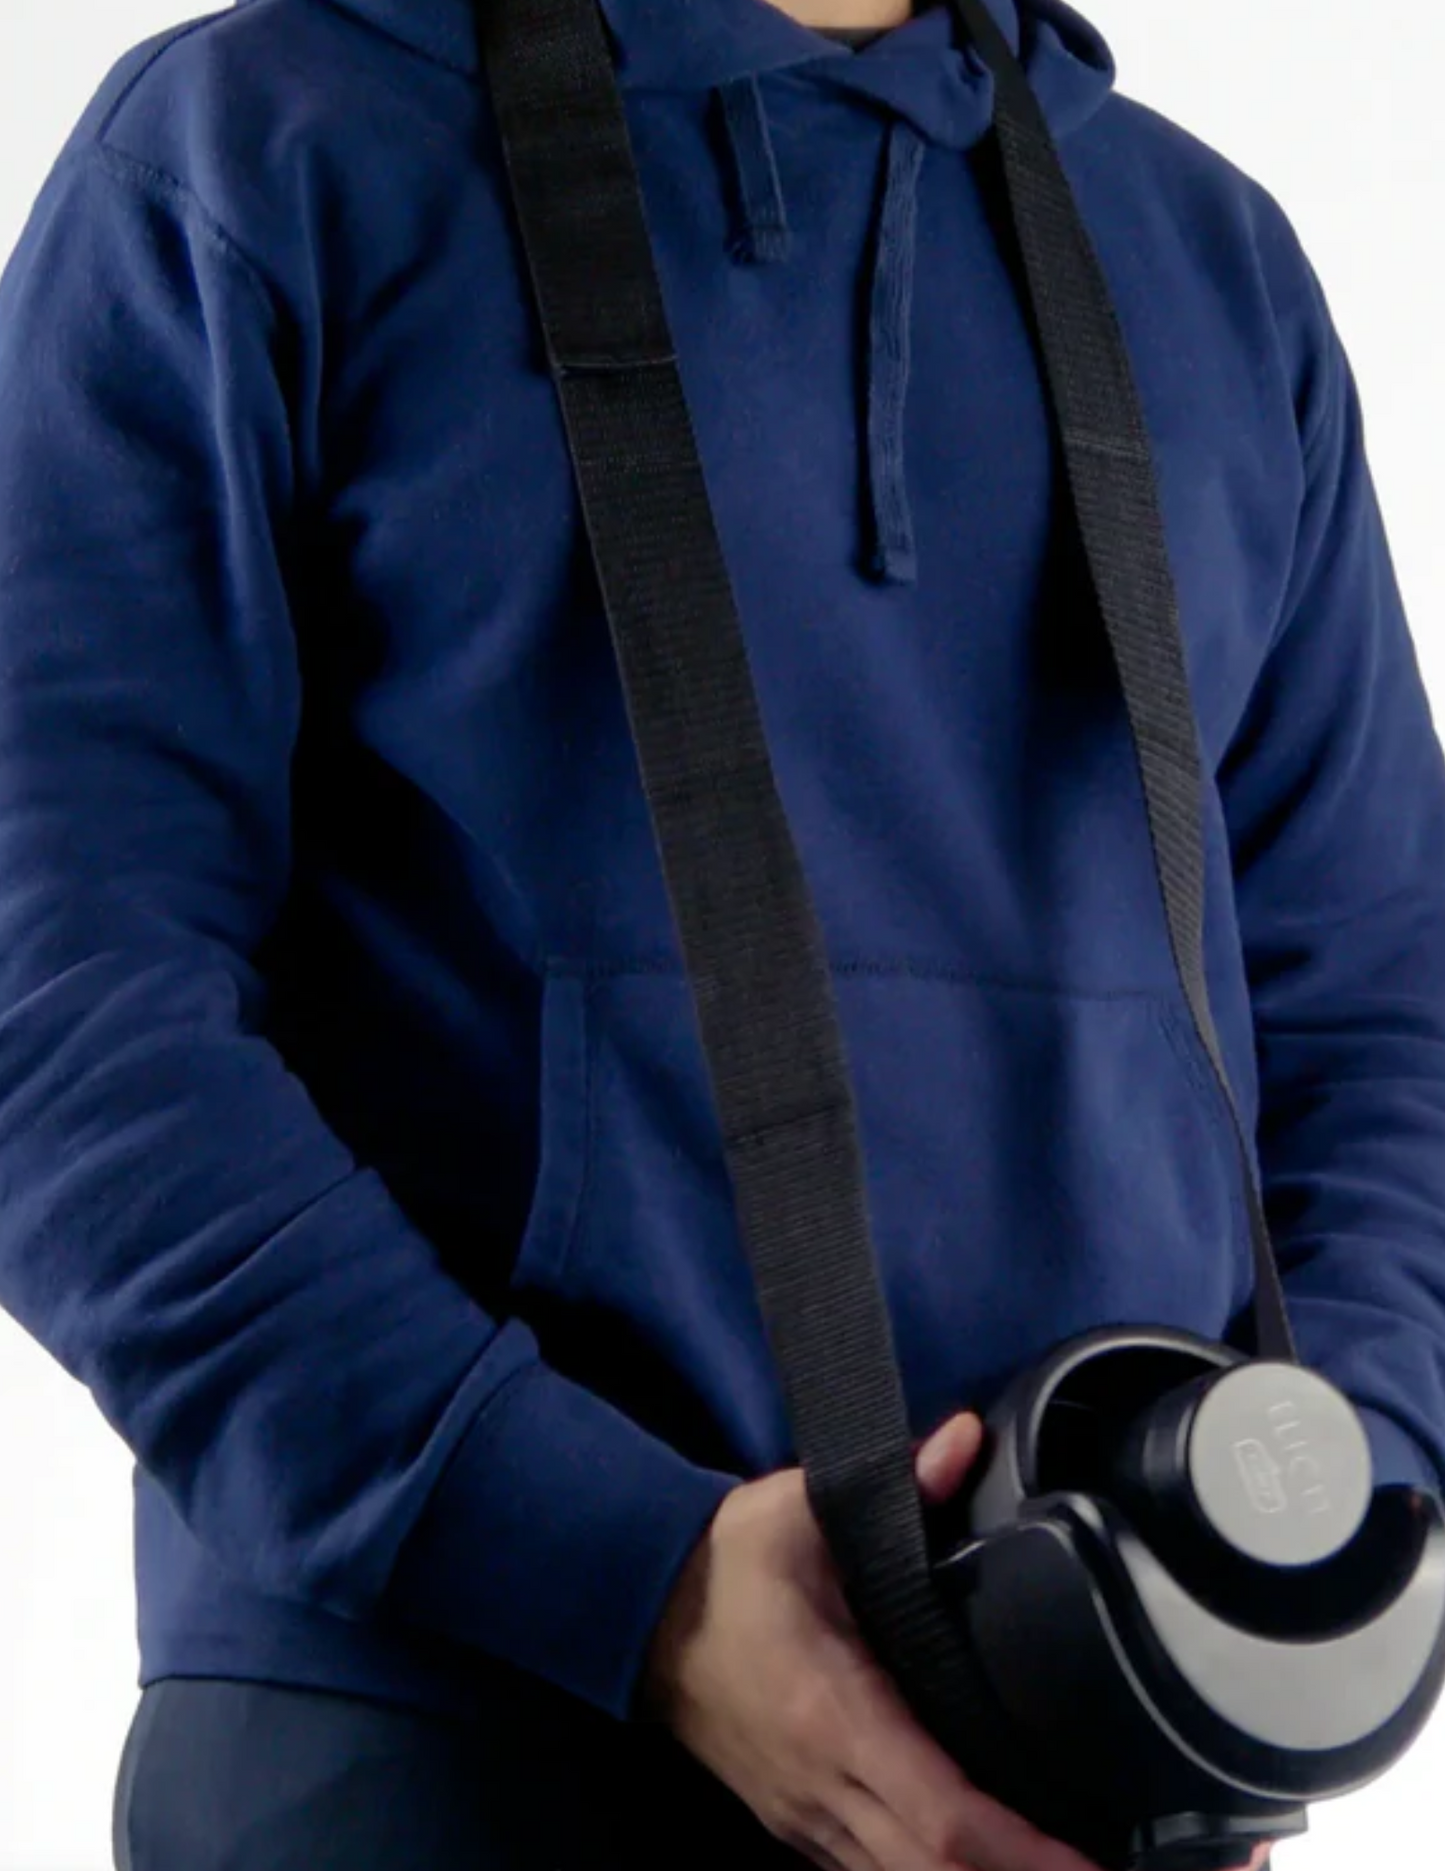 Photo shows how the Keon Neck Strap Accessory by KiiRoo is worn.